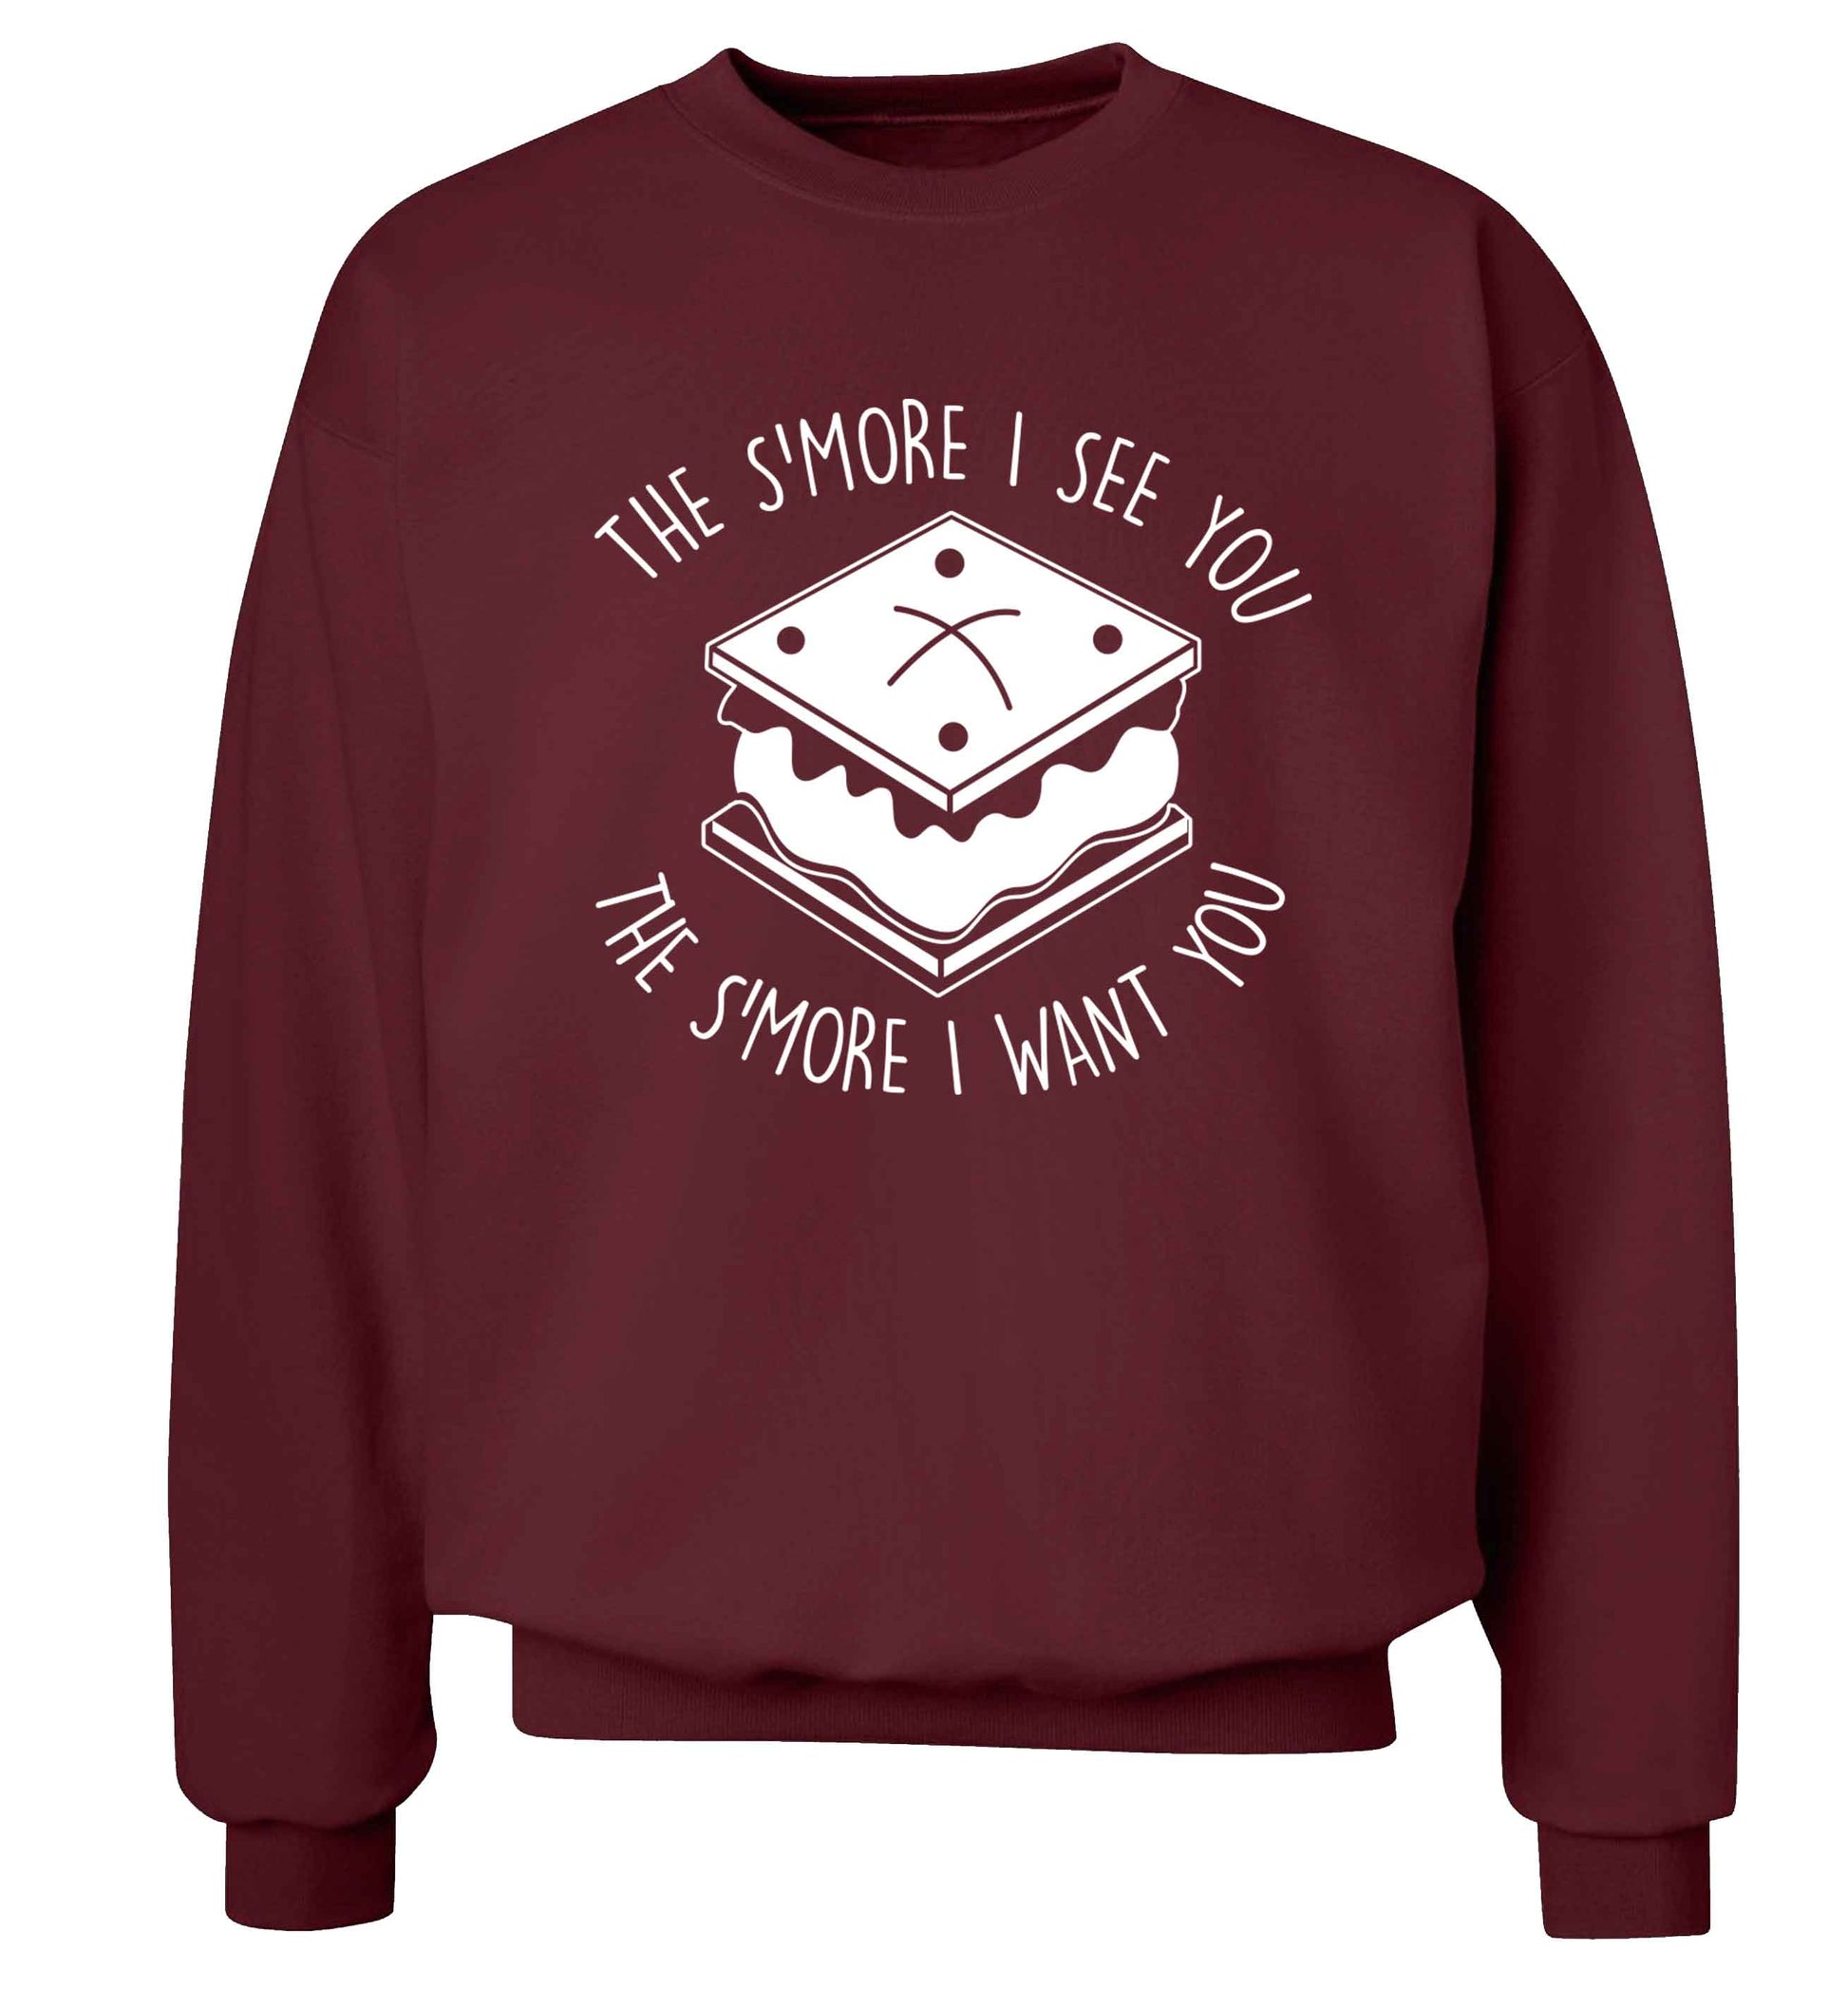 The s'more I see you the s'more I want you Adult's unisex maroon Sweater 2XL